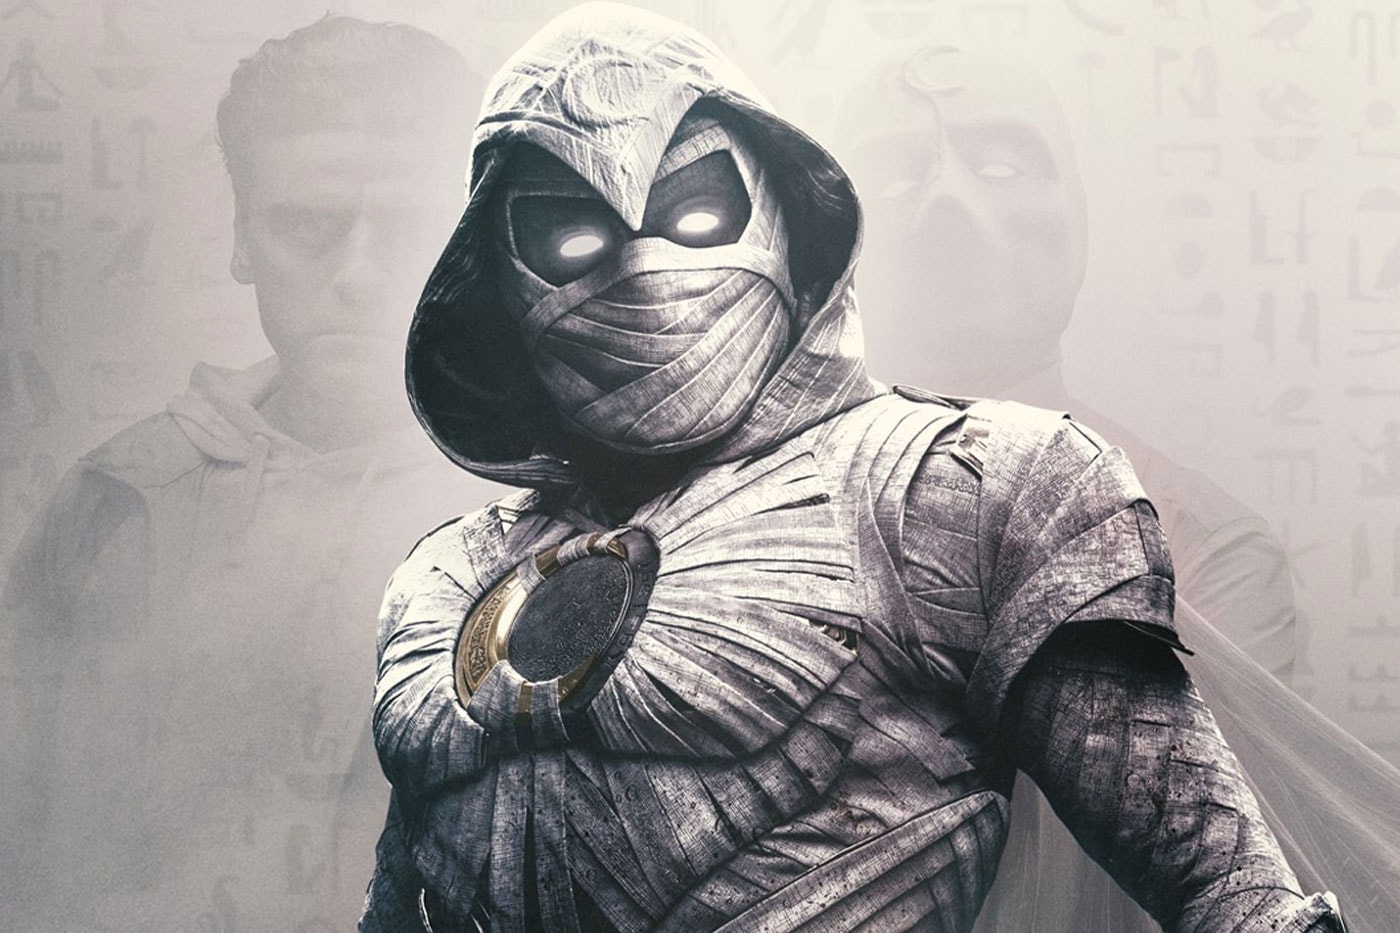 'Moon Knight' Director Teases Unexpected "Twists and Turns" for Season Finale mohamed diab oscar isaac steven grant disney plus disney+ did dissociative identity disorder 